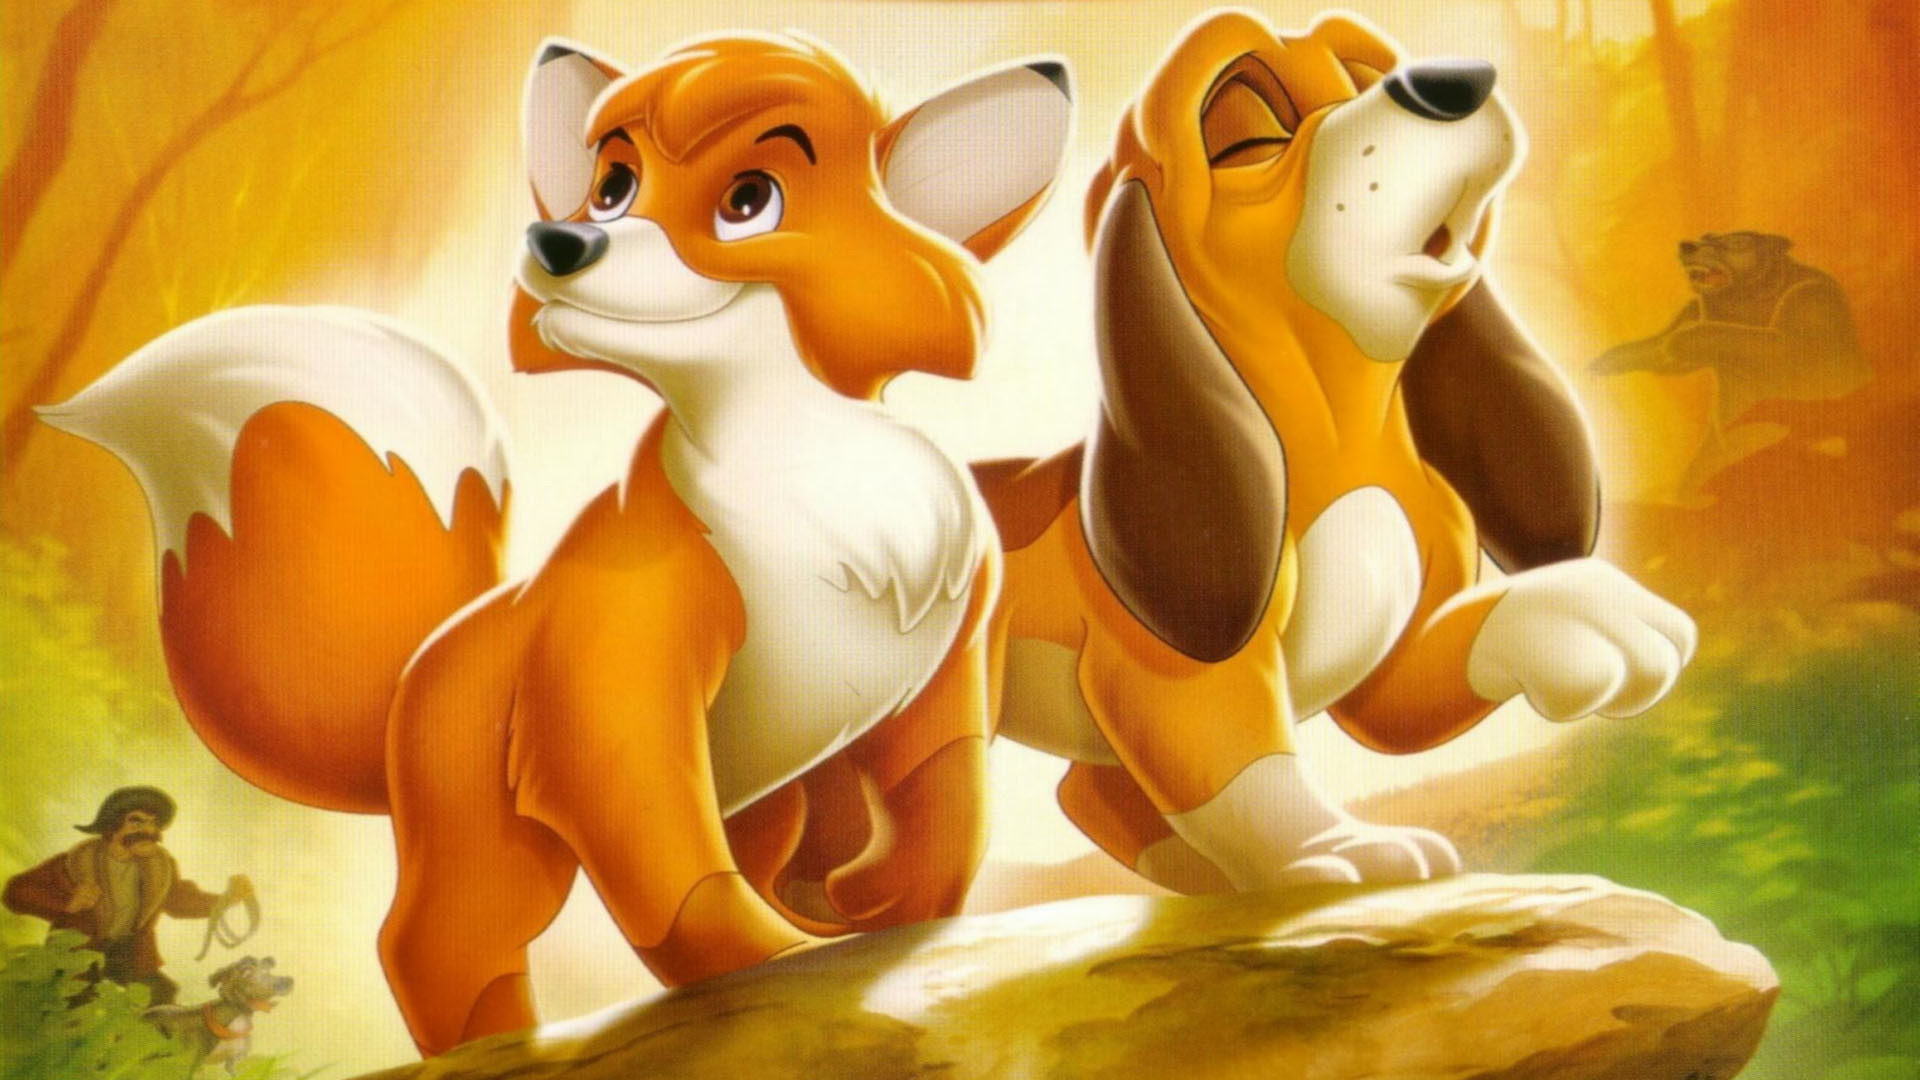  fox and the hound hd wallpaper wallpapers55com   Best Wallpapers